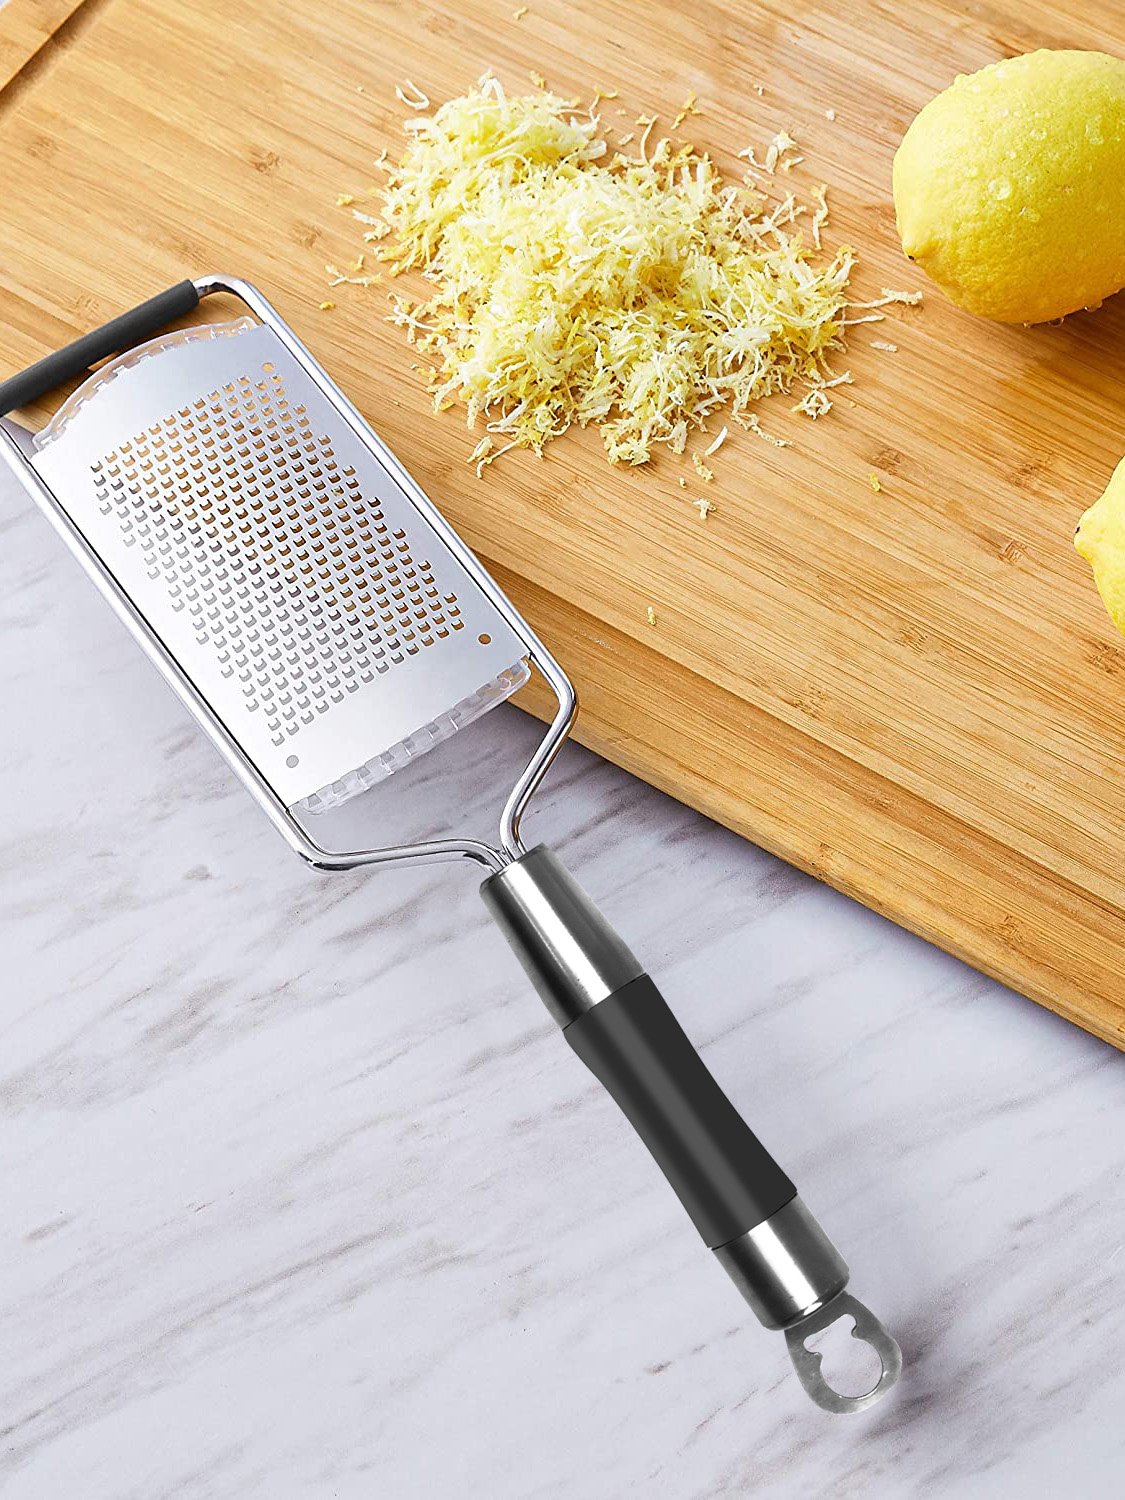 Stainless Steel Grater-BE14712